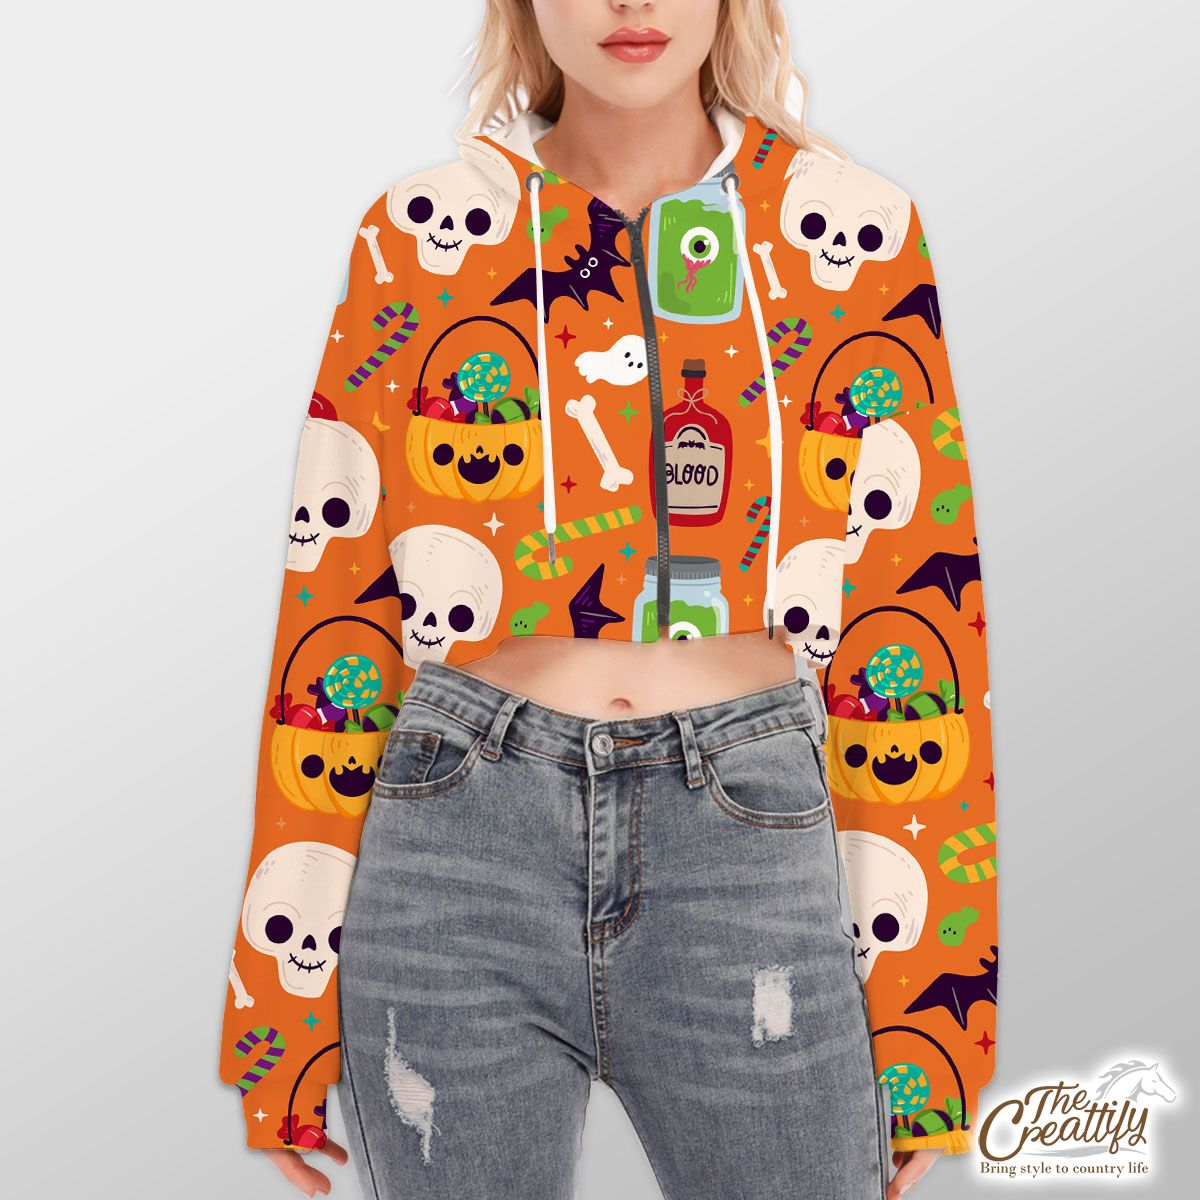 Cute Pumpkin, Jack O Lantern Full of Candy, Witch Potions and Bat Orange Halloween Hoodie With Zipper Closure